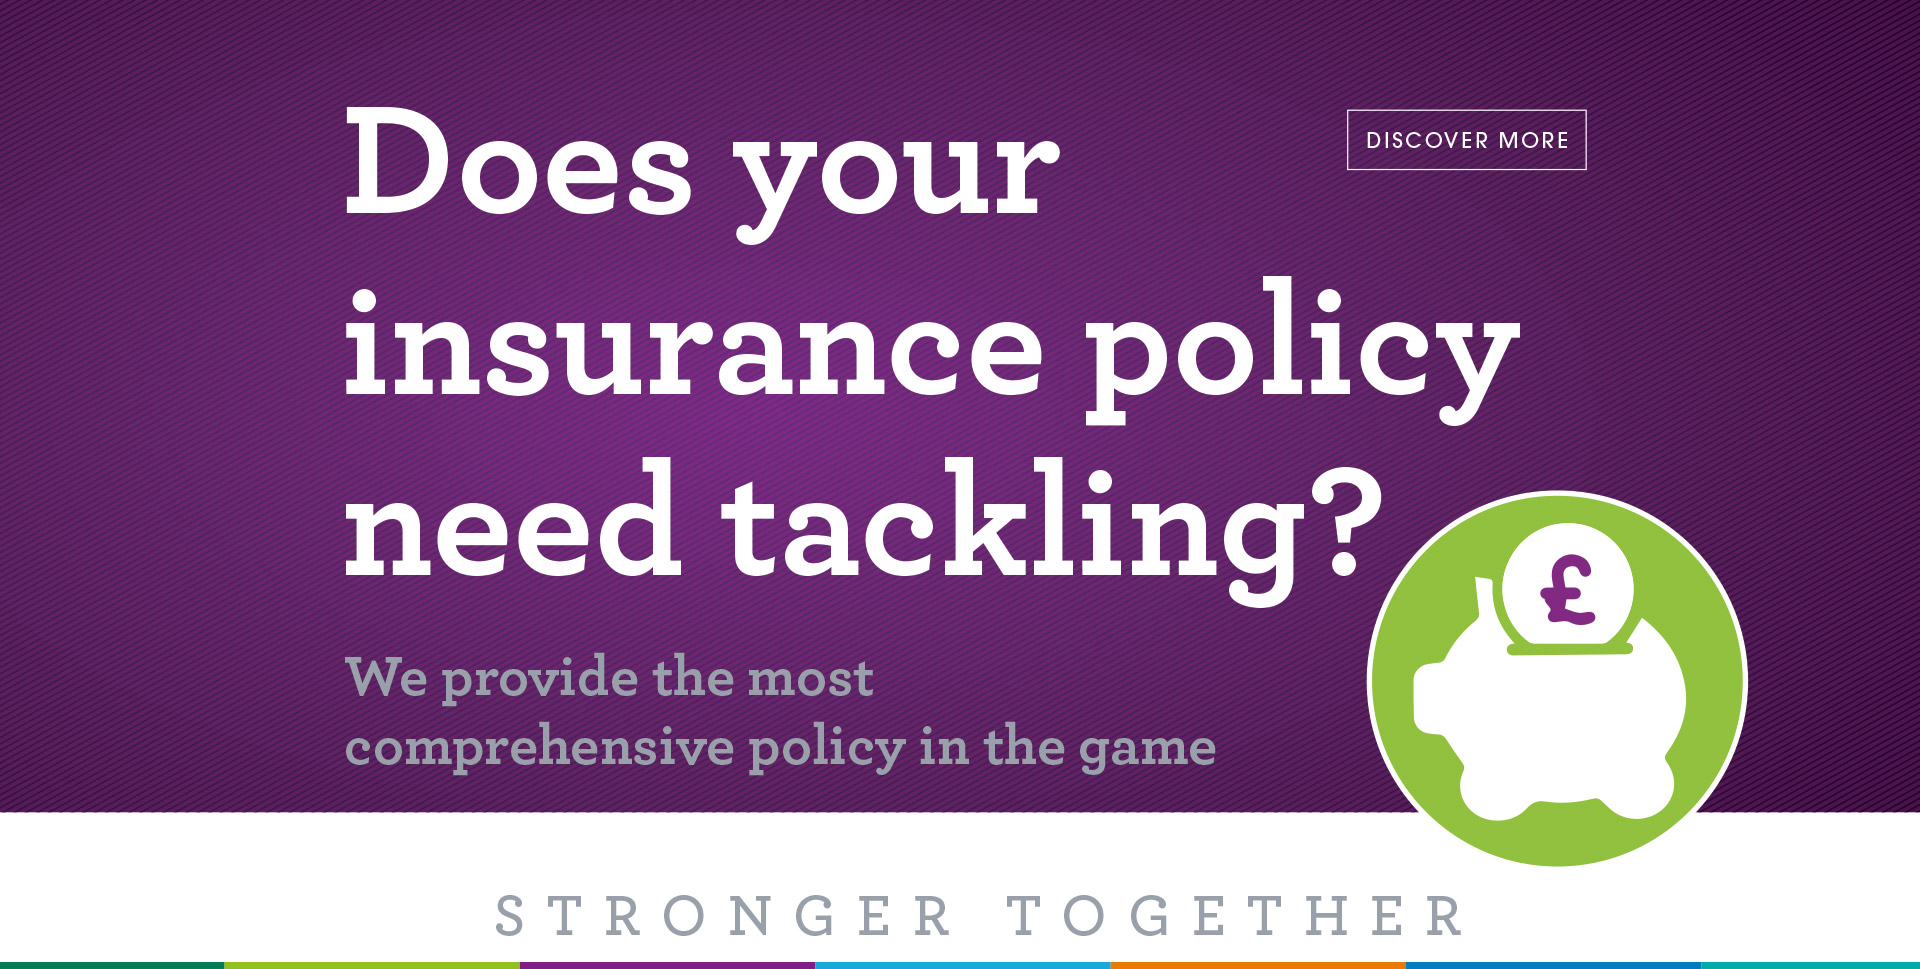 Does your insurance policy need tackling?